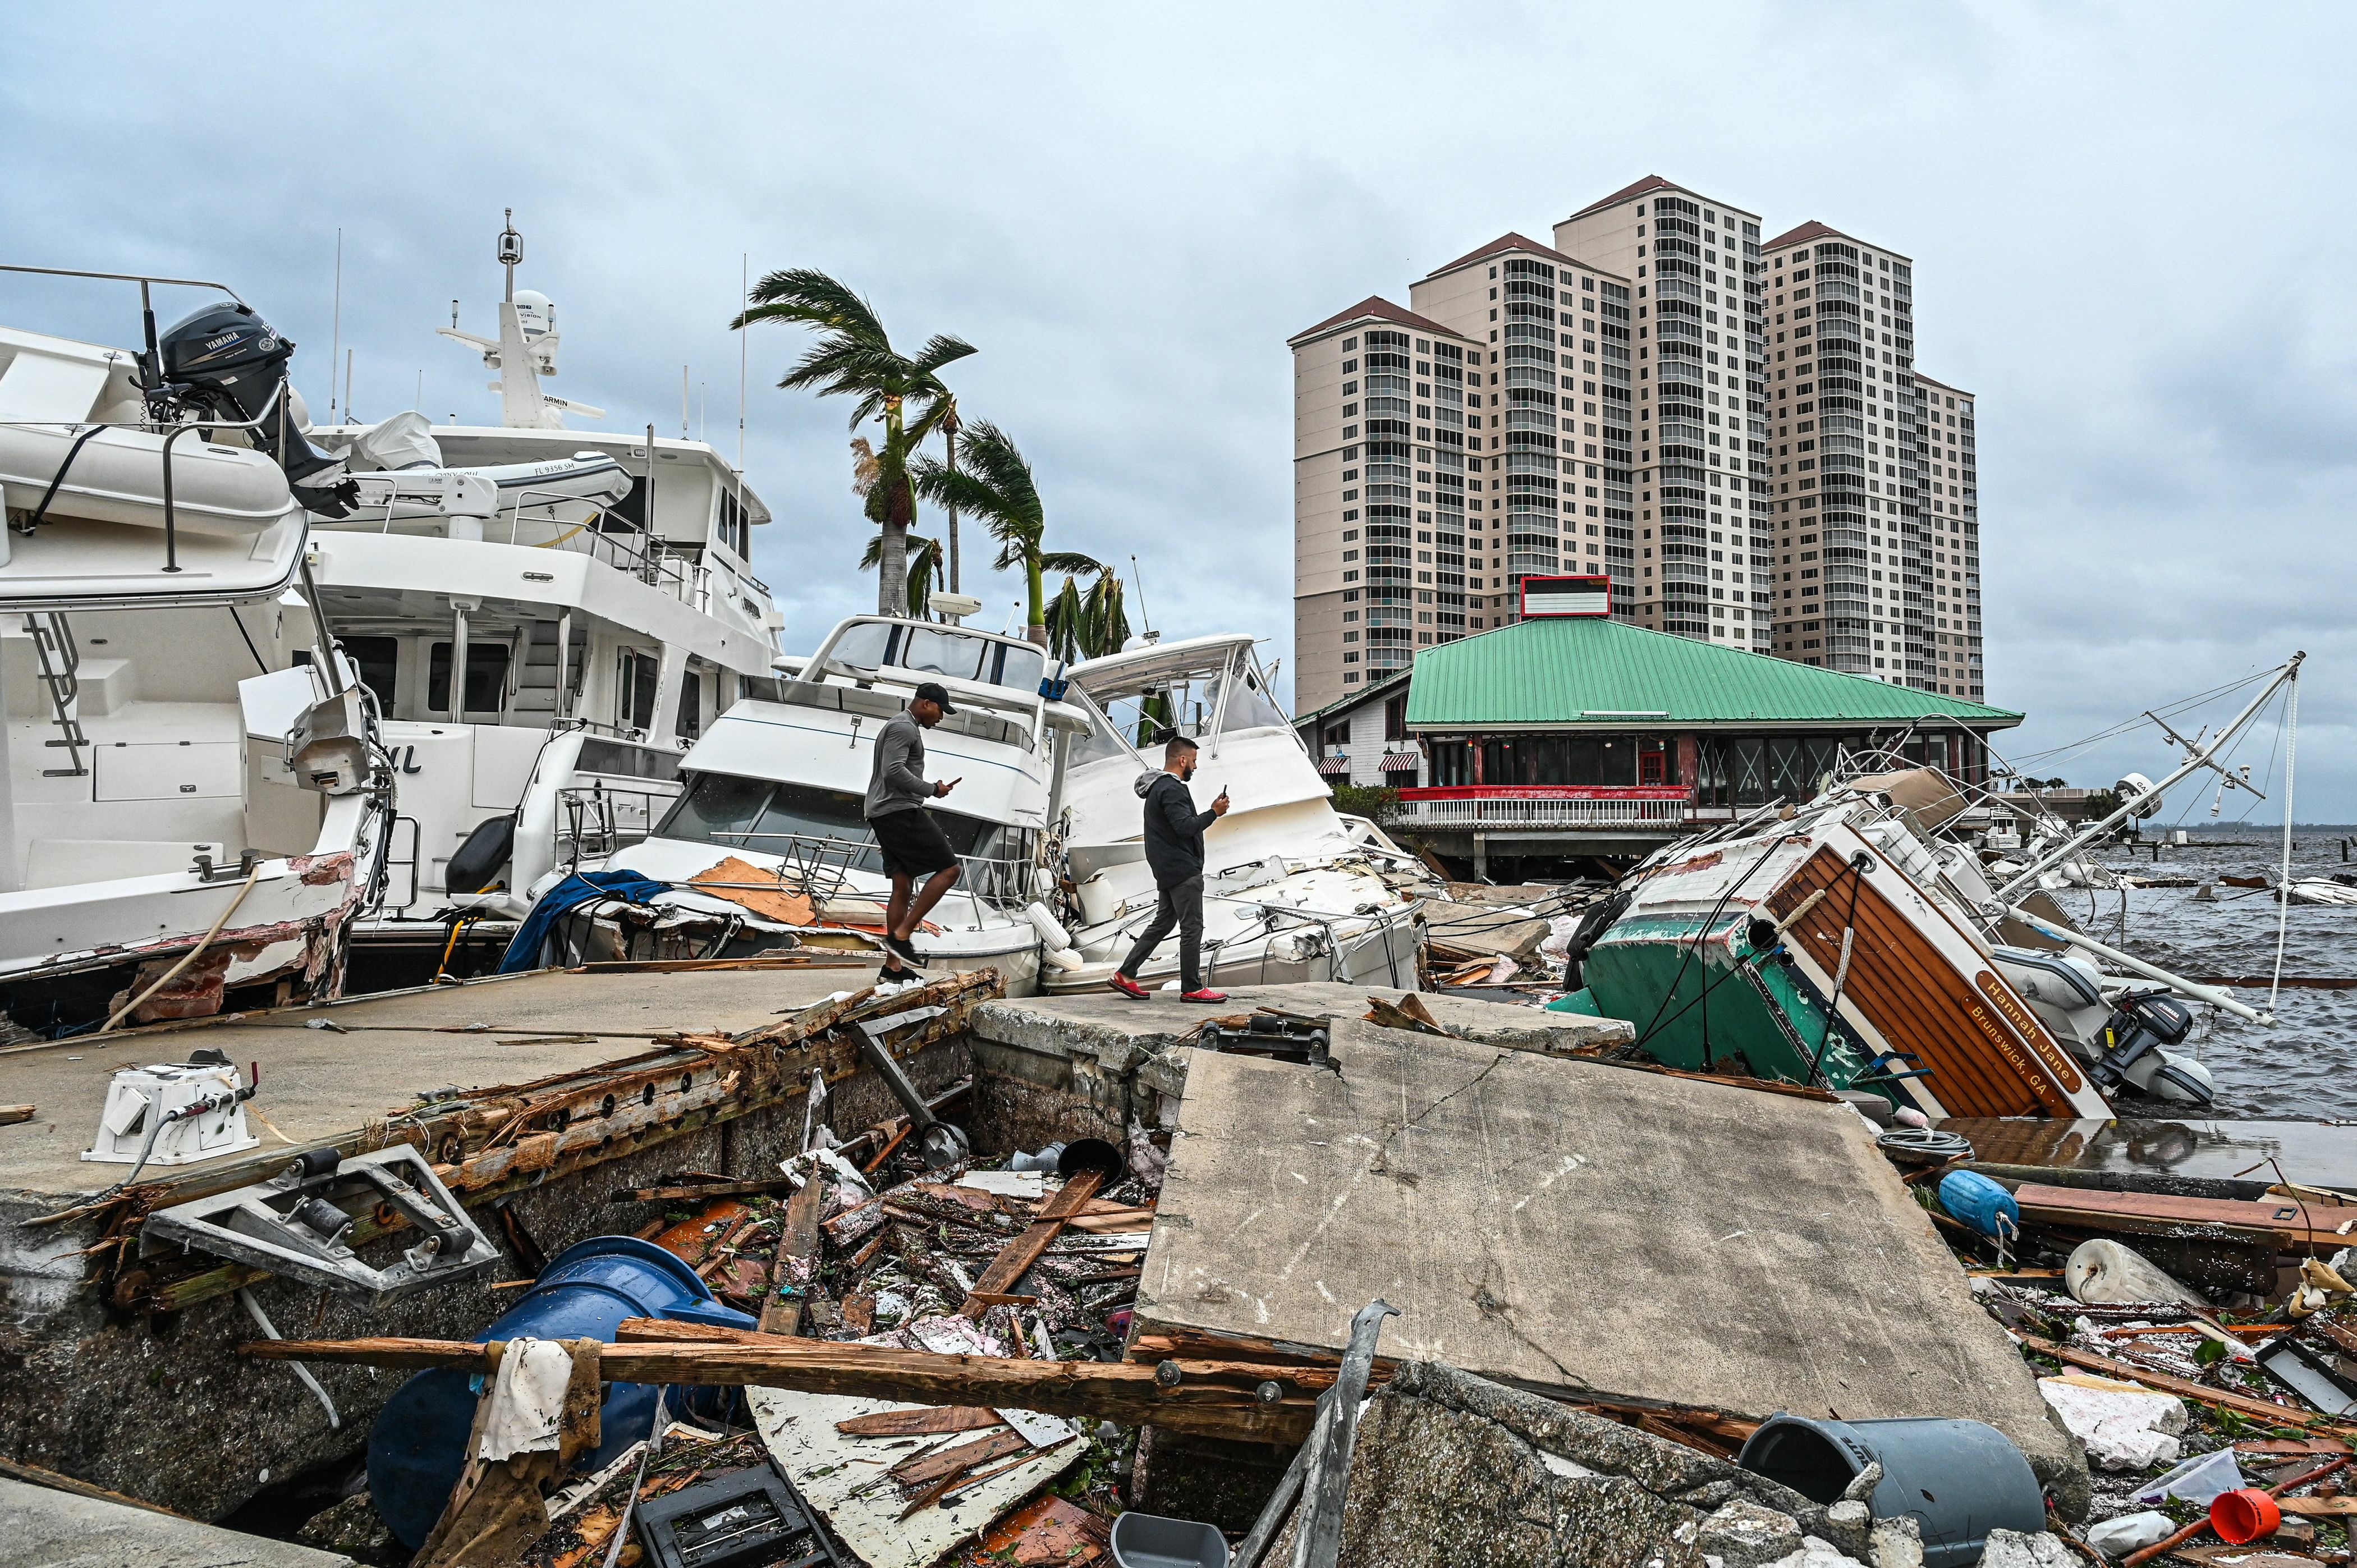 wreckage of boats and harbor structures after Hurricane Ian